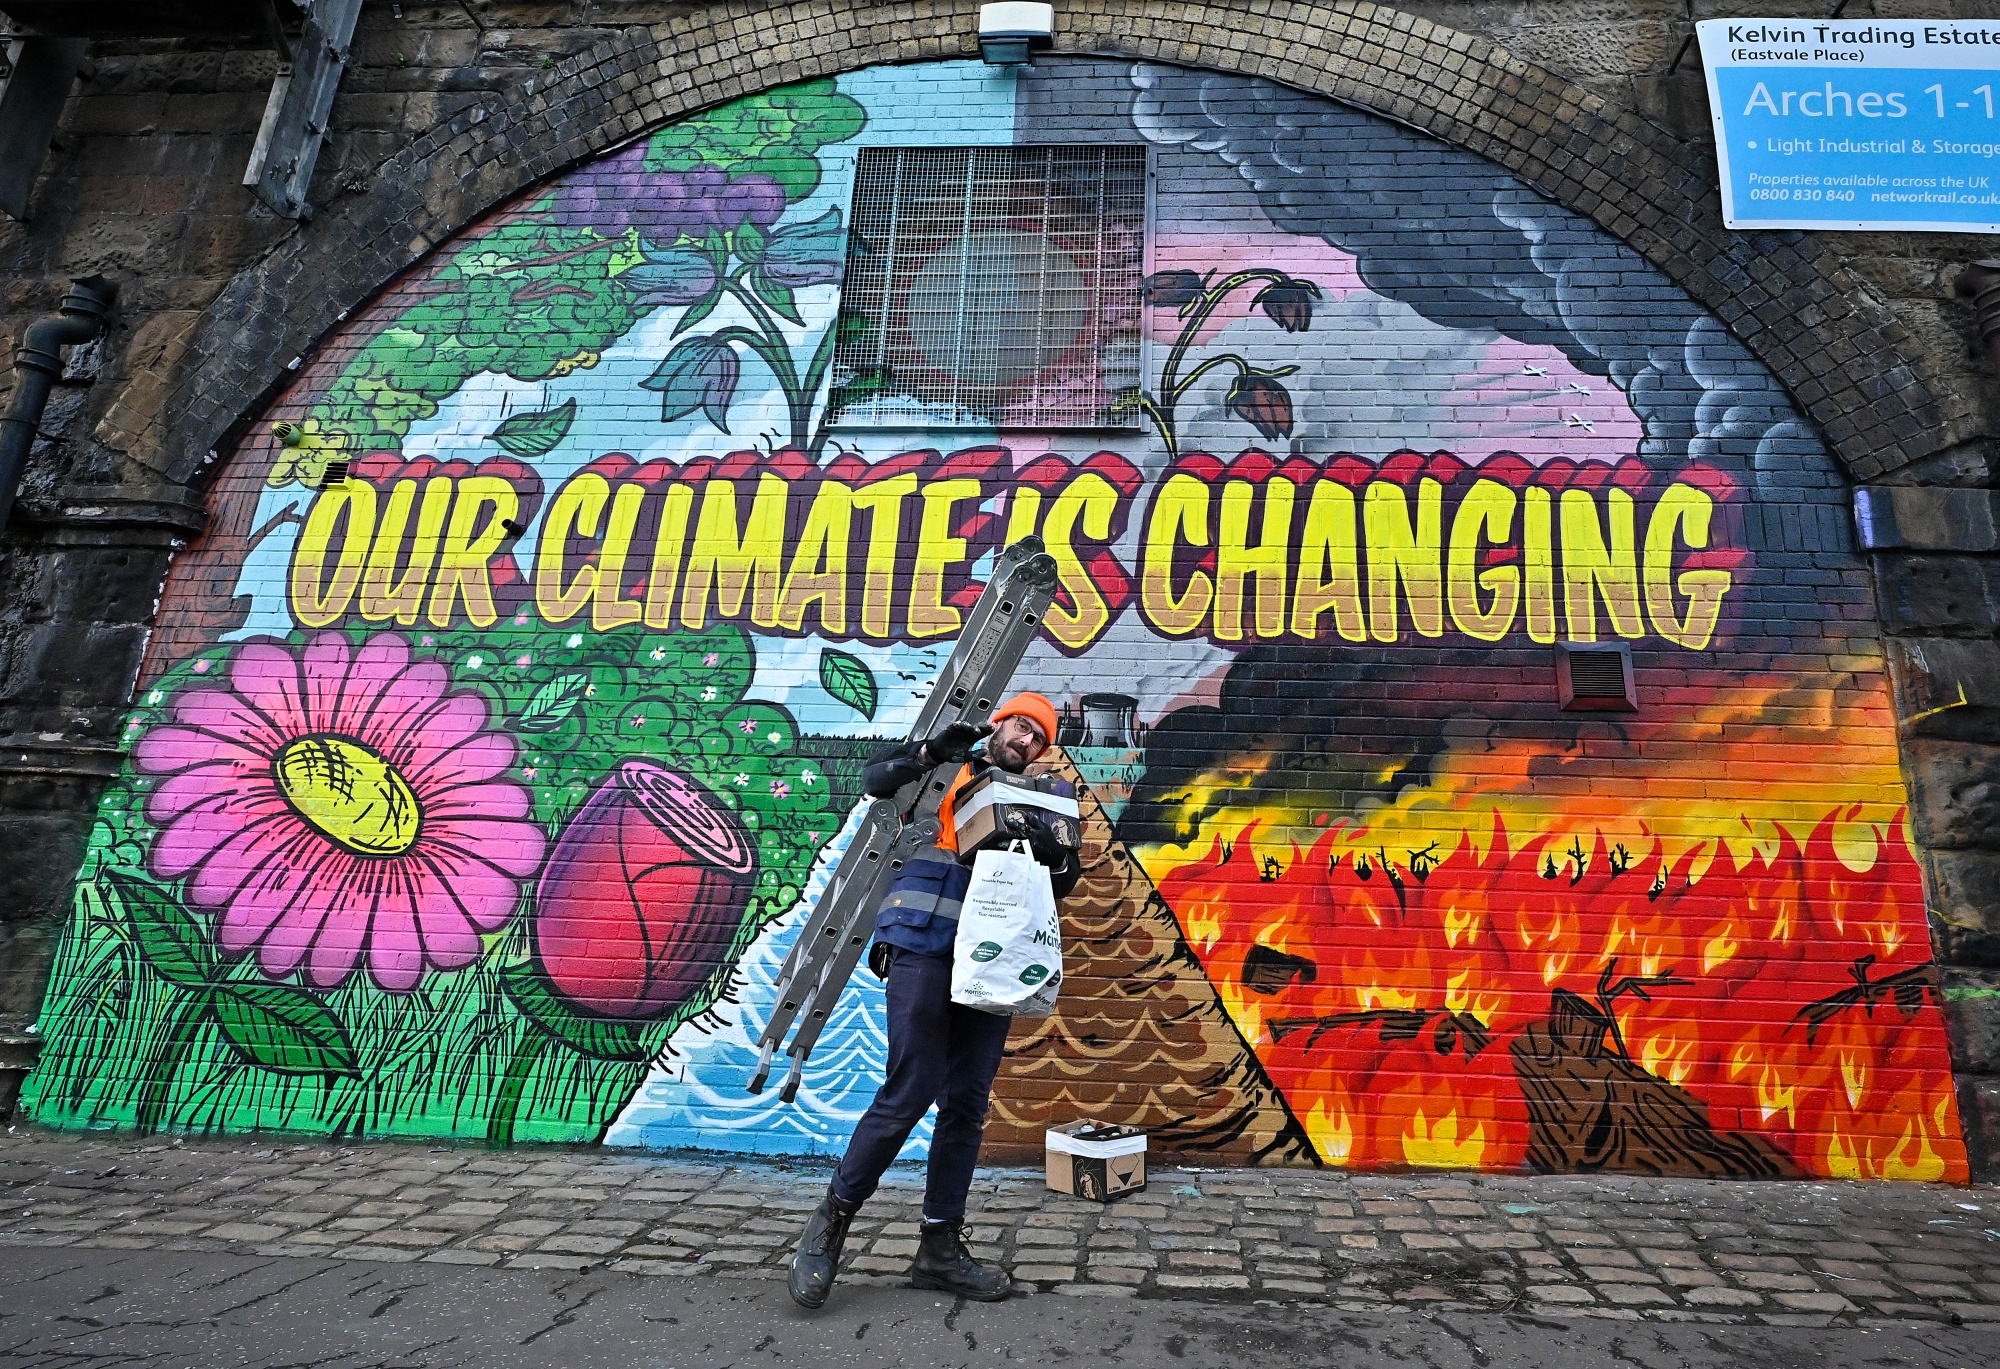 A mural near the Scottish Events Centre&nbsp;which will be hosting the COP26 summit.